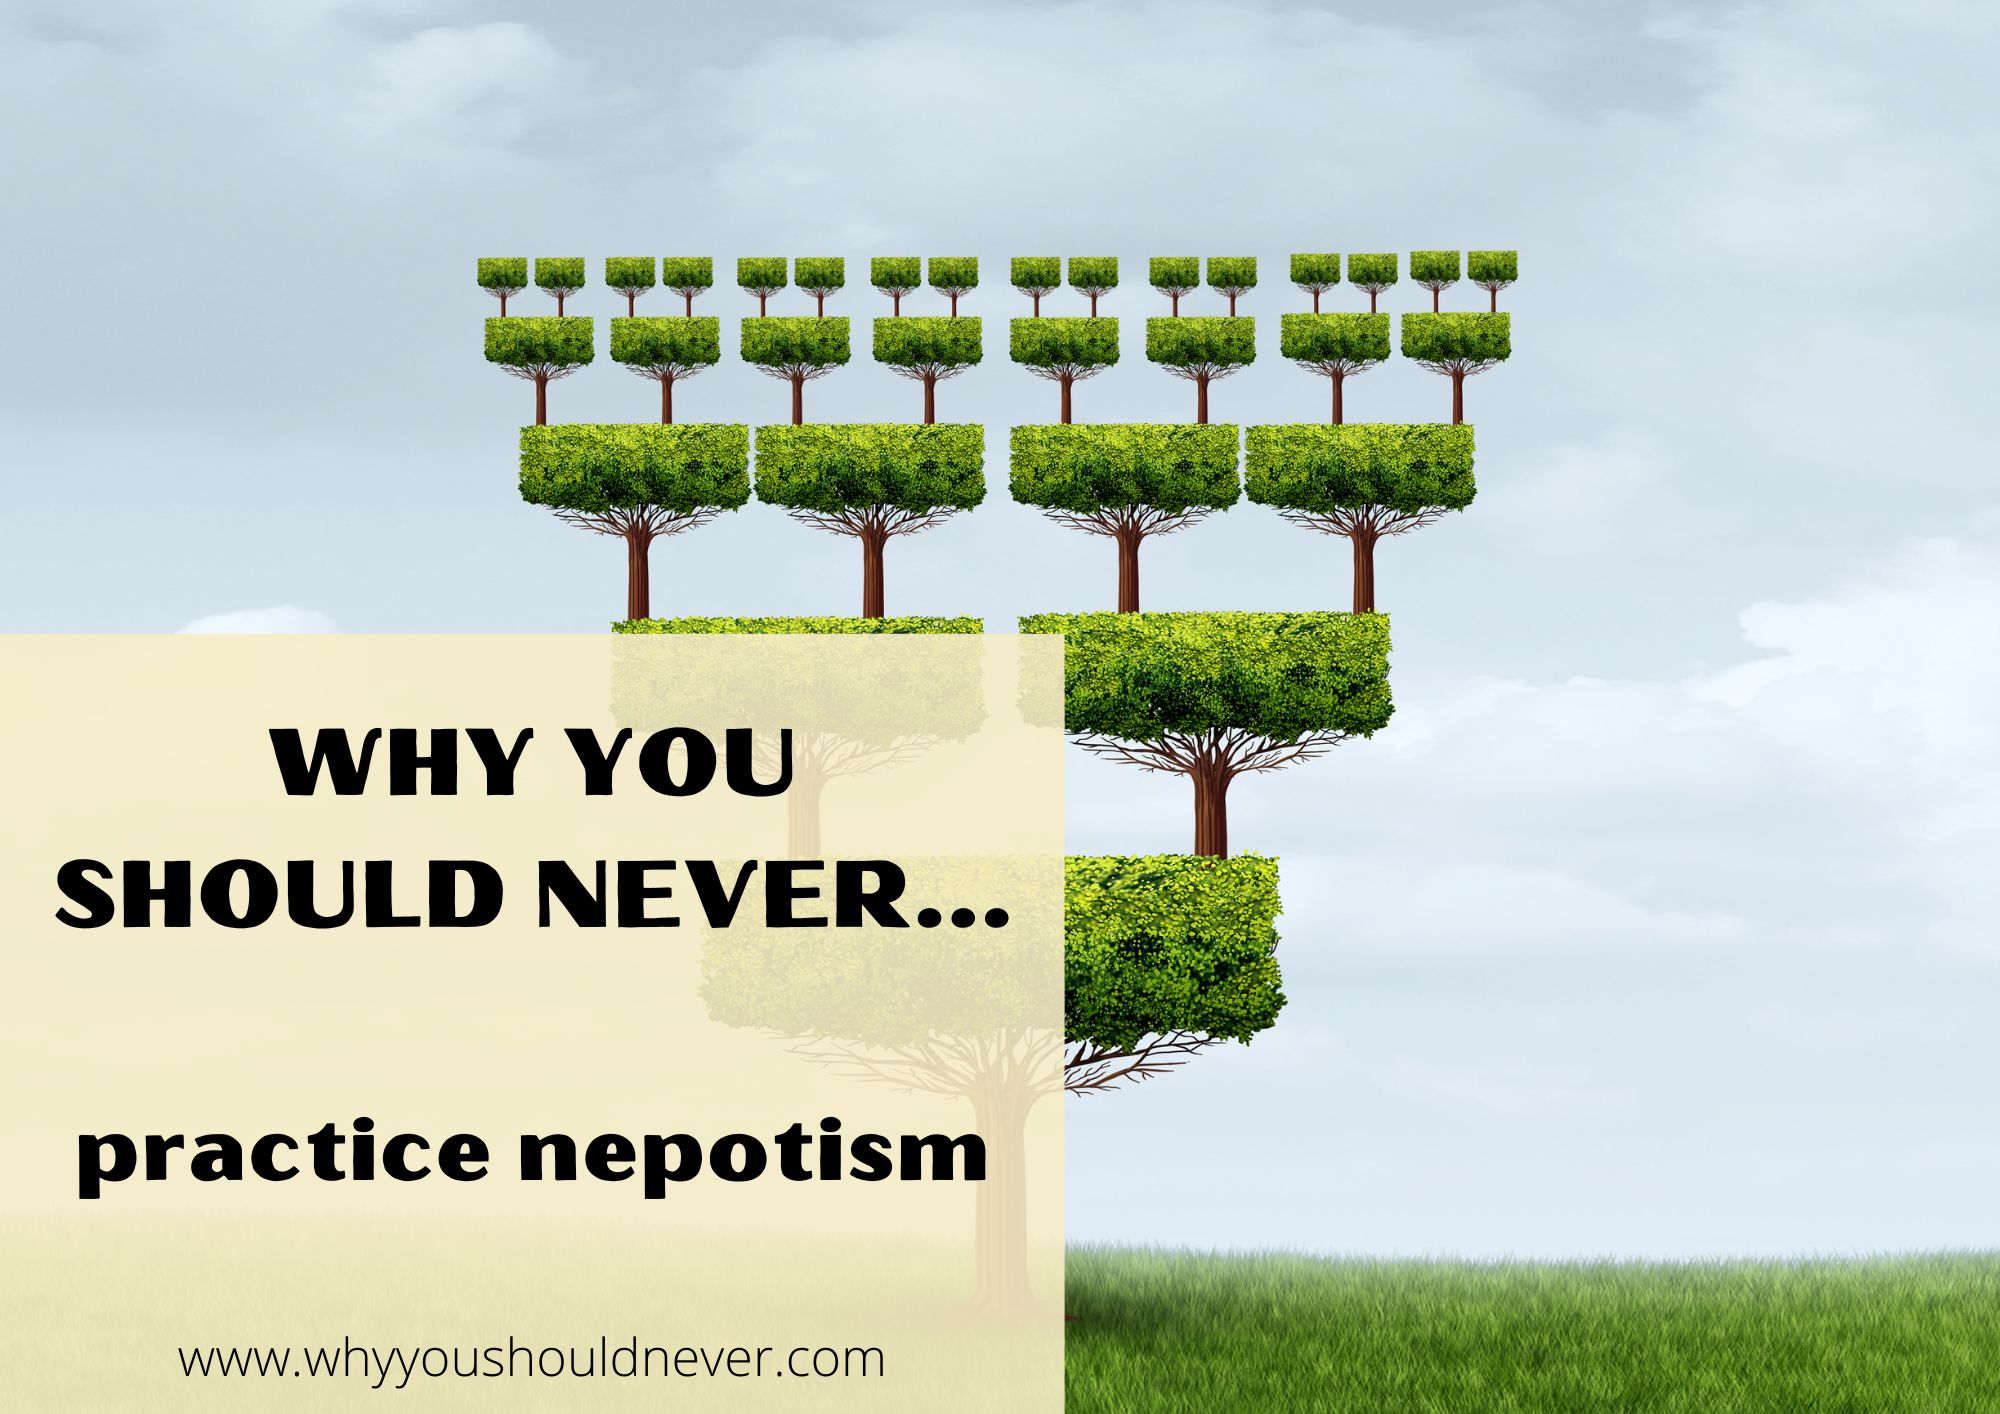 Why You Should Never Practice Nepotism